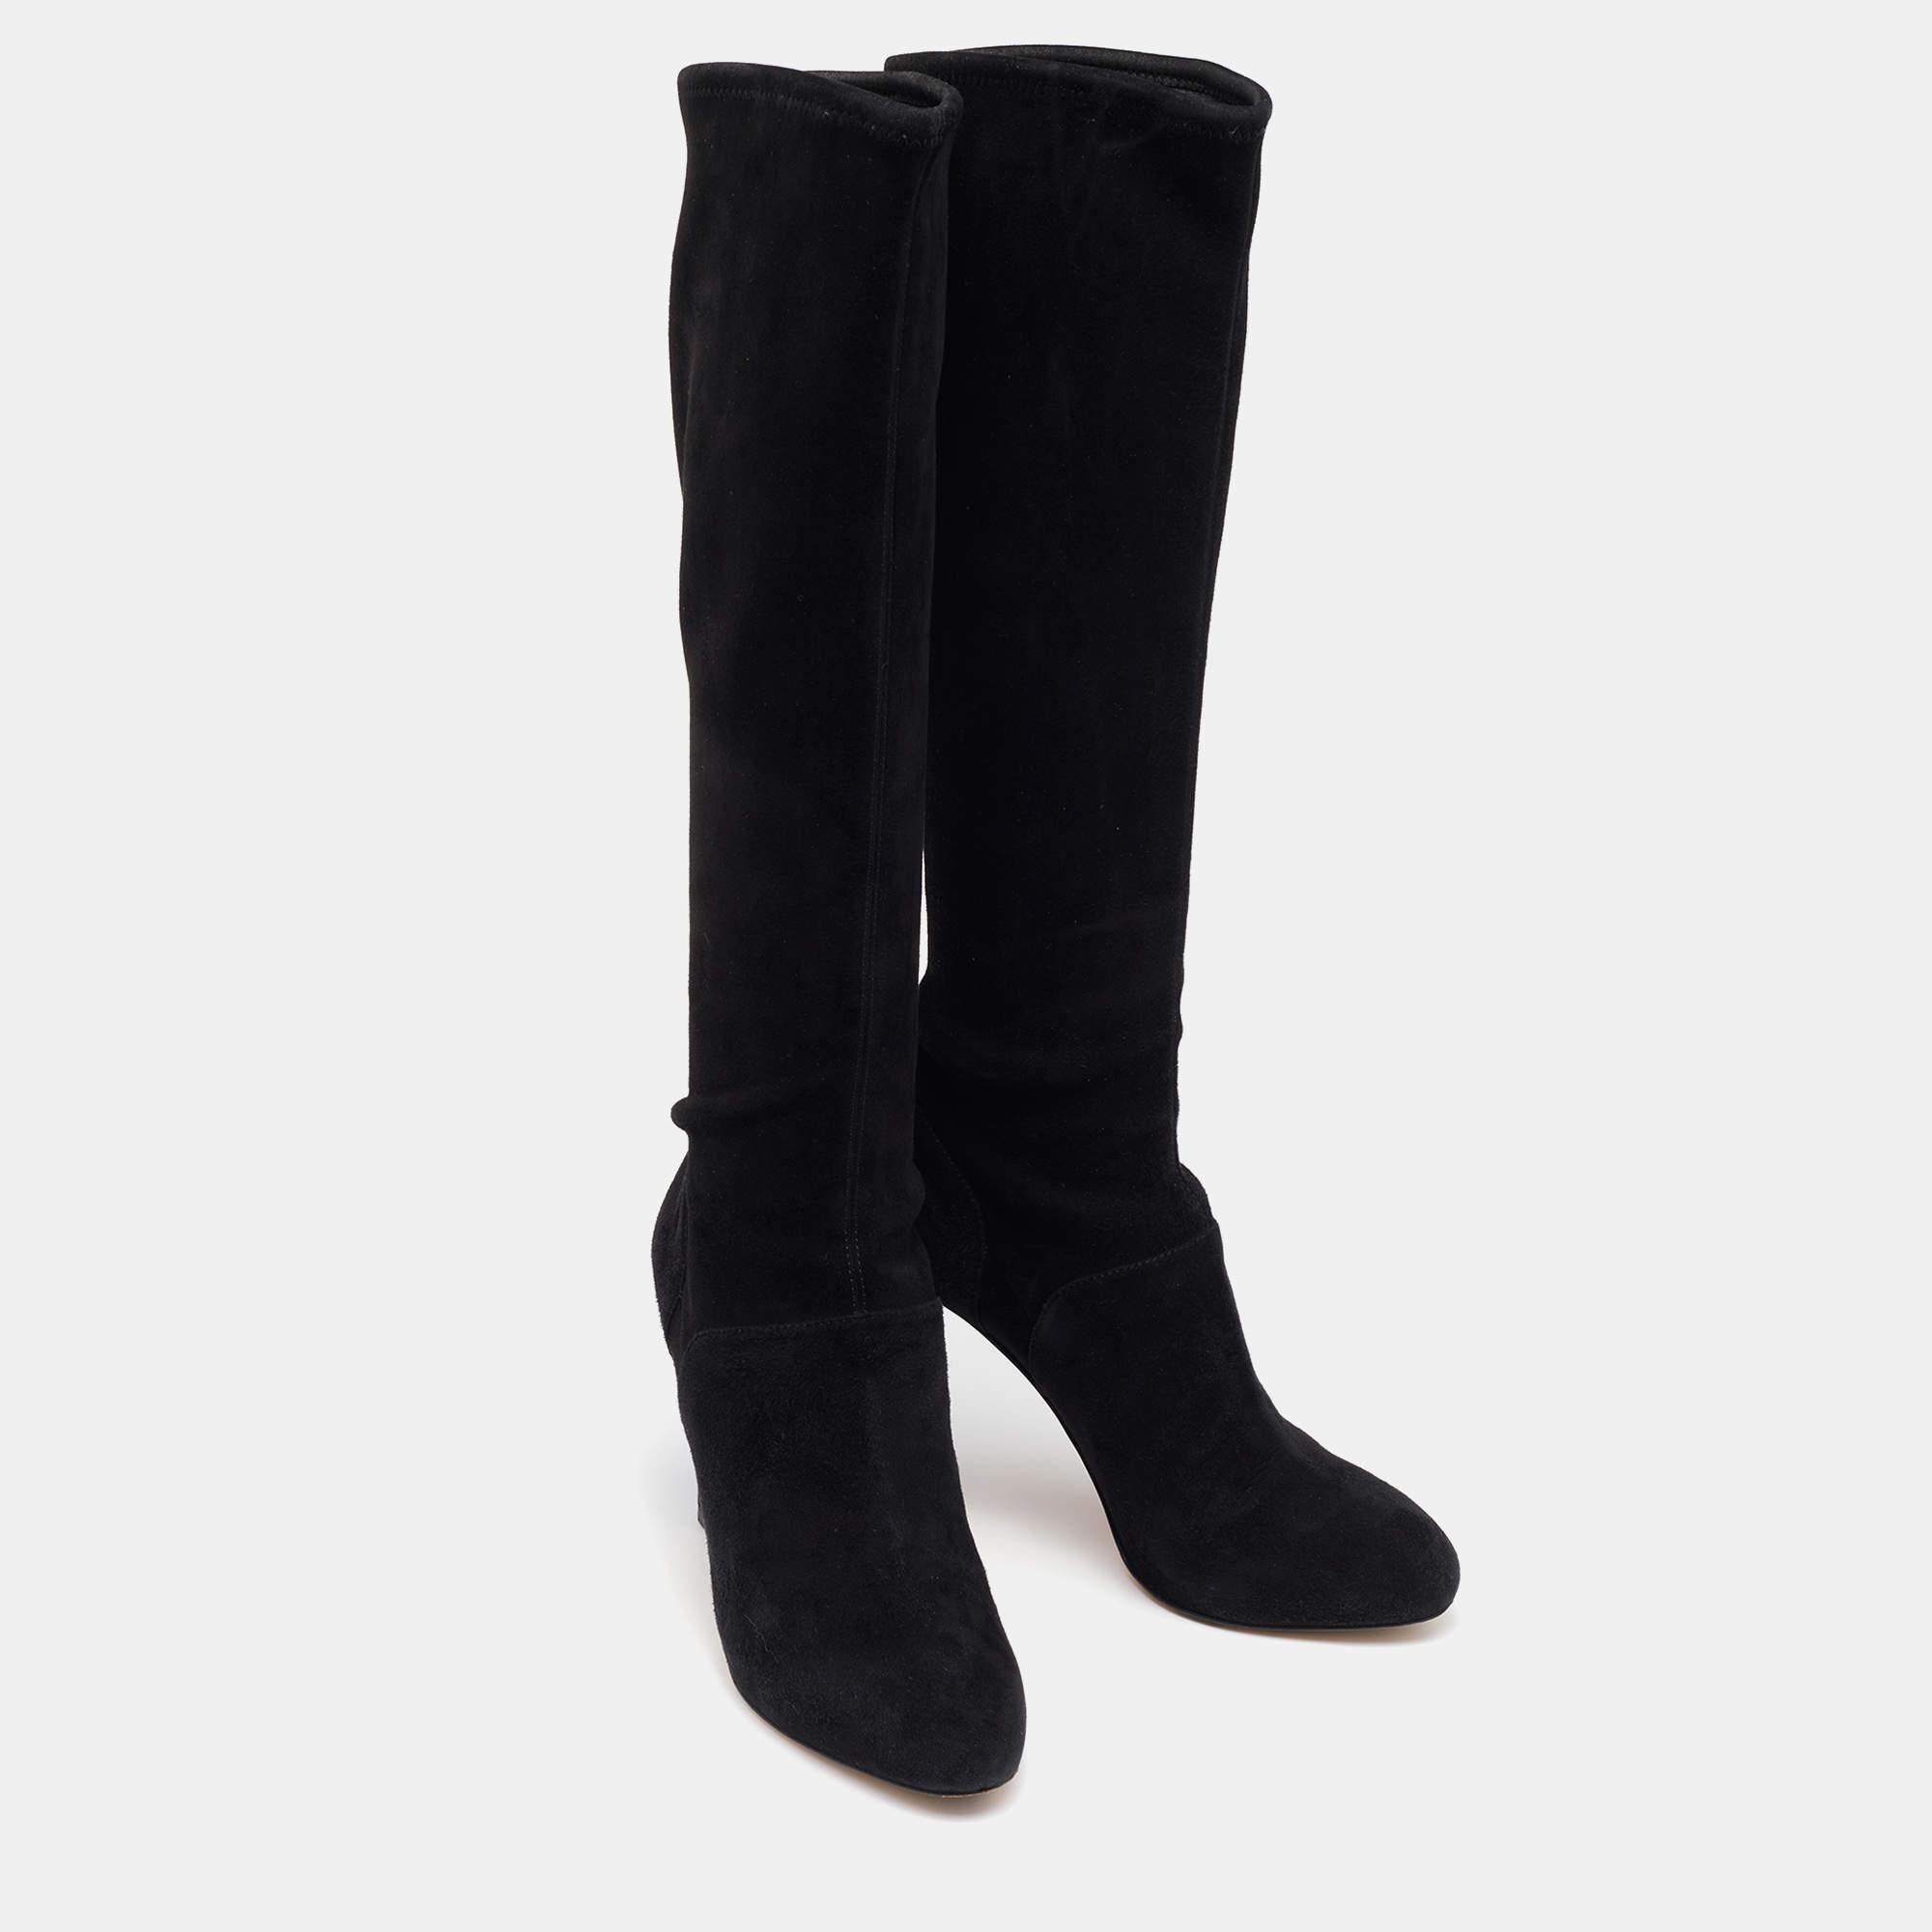 Gianvito Rossi Black Suede Knee Length Boots Size 37.5 For Sale 1